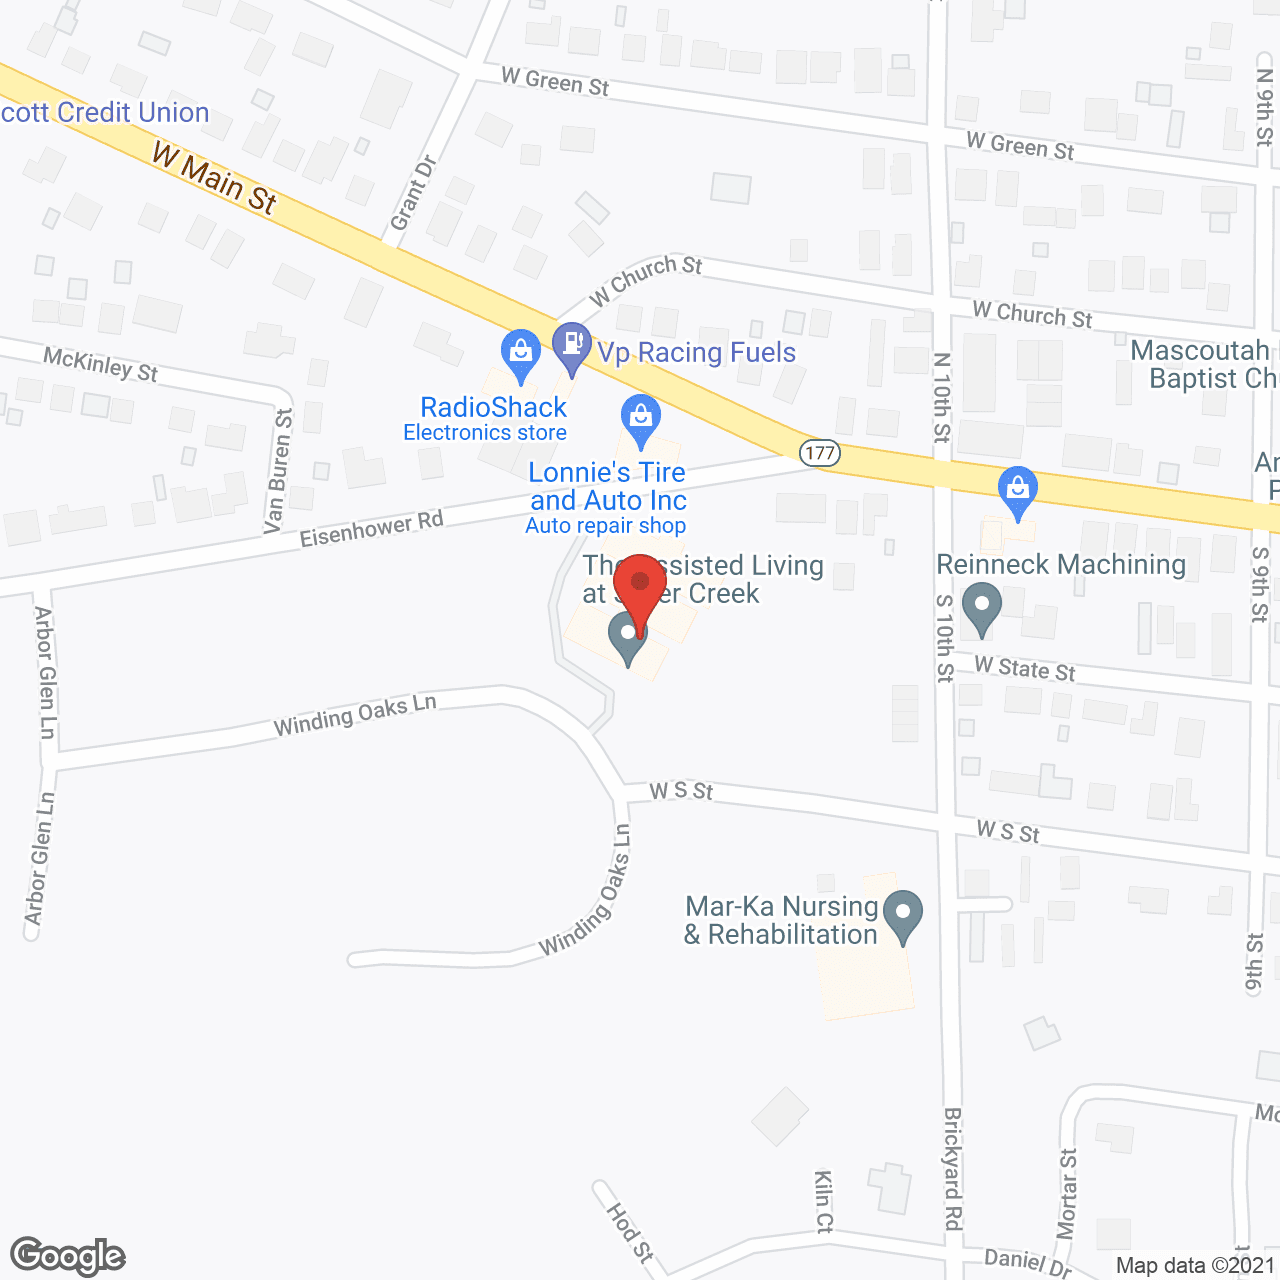 Assisted Living at Silver Creek in google map